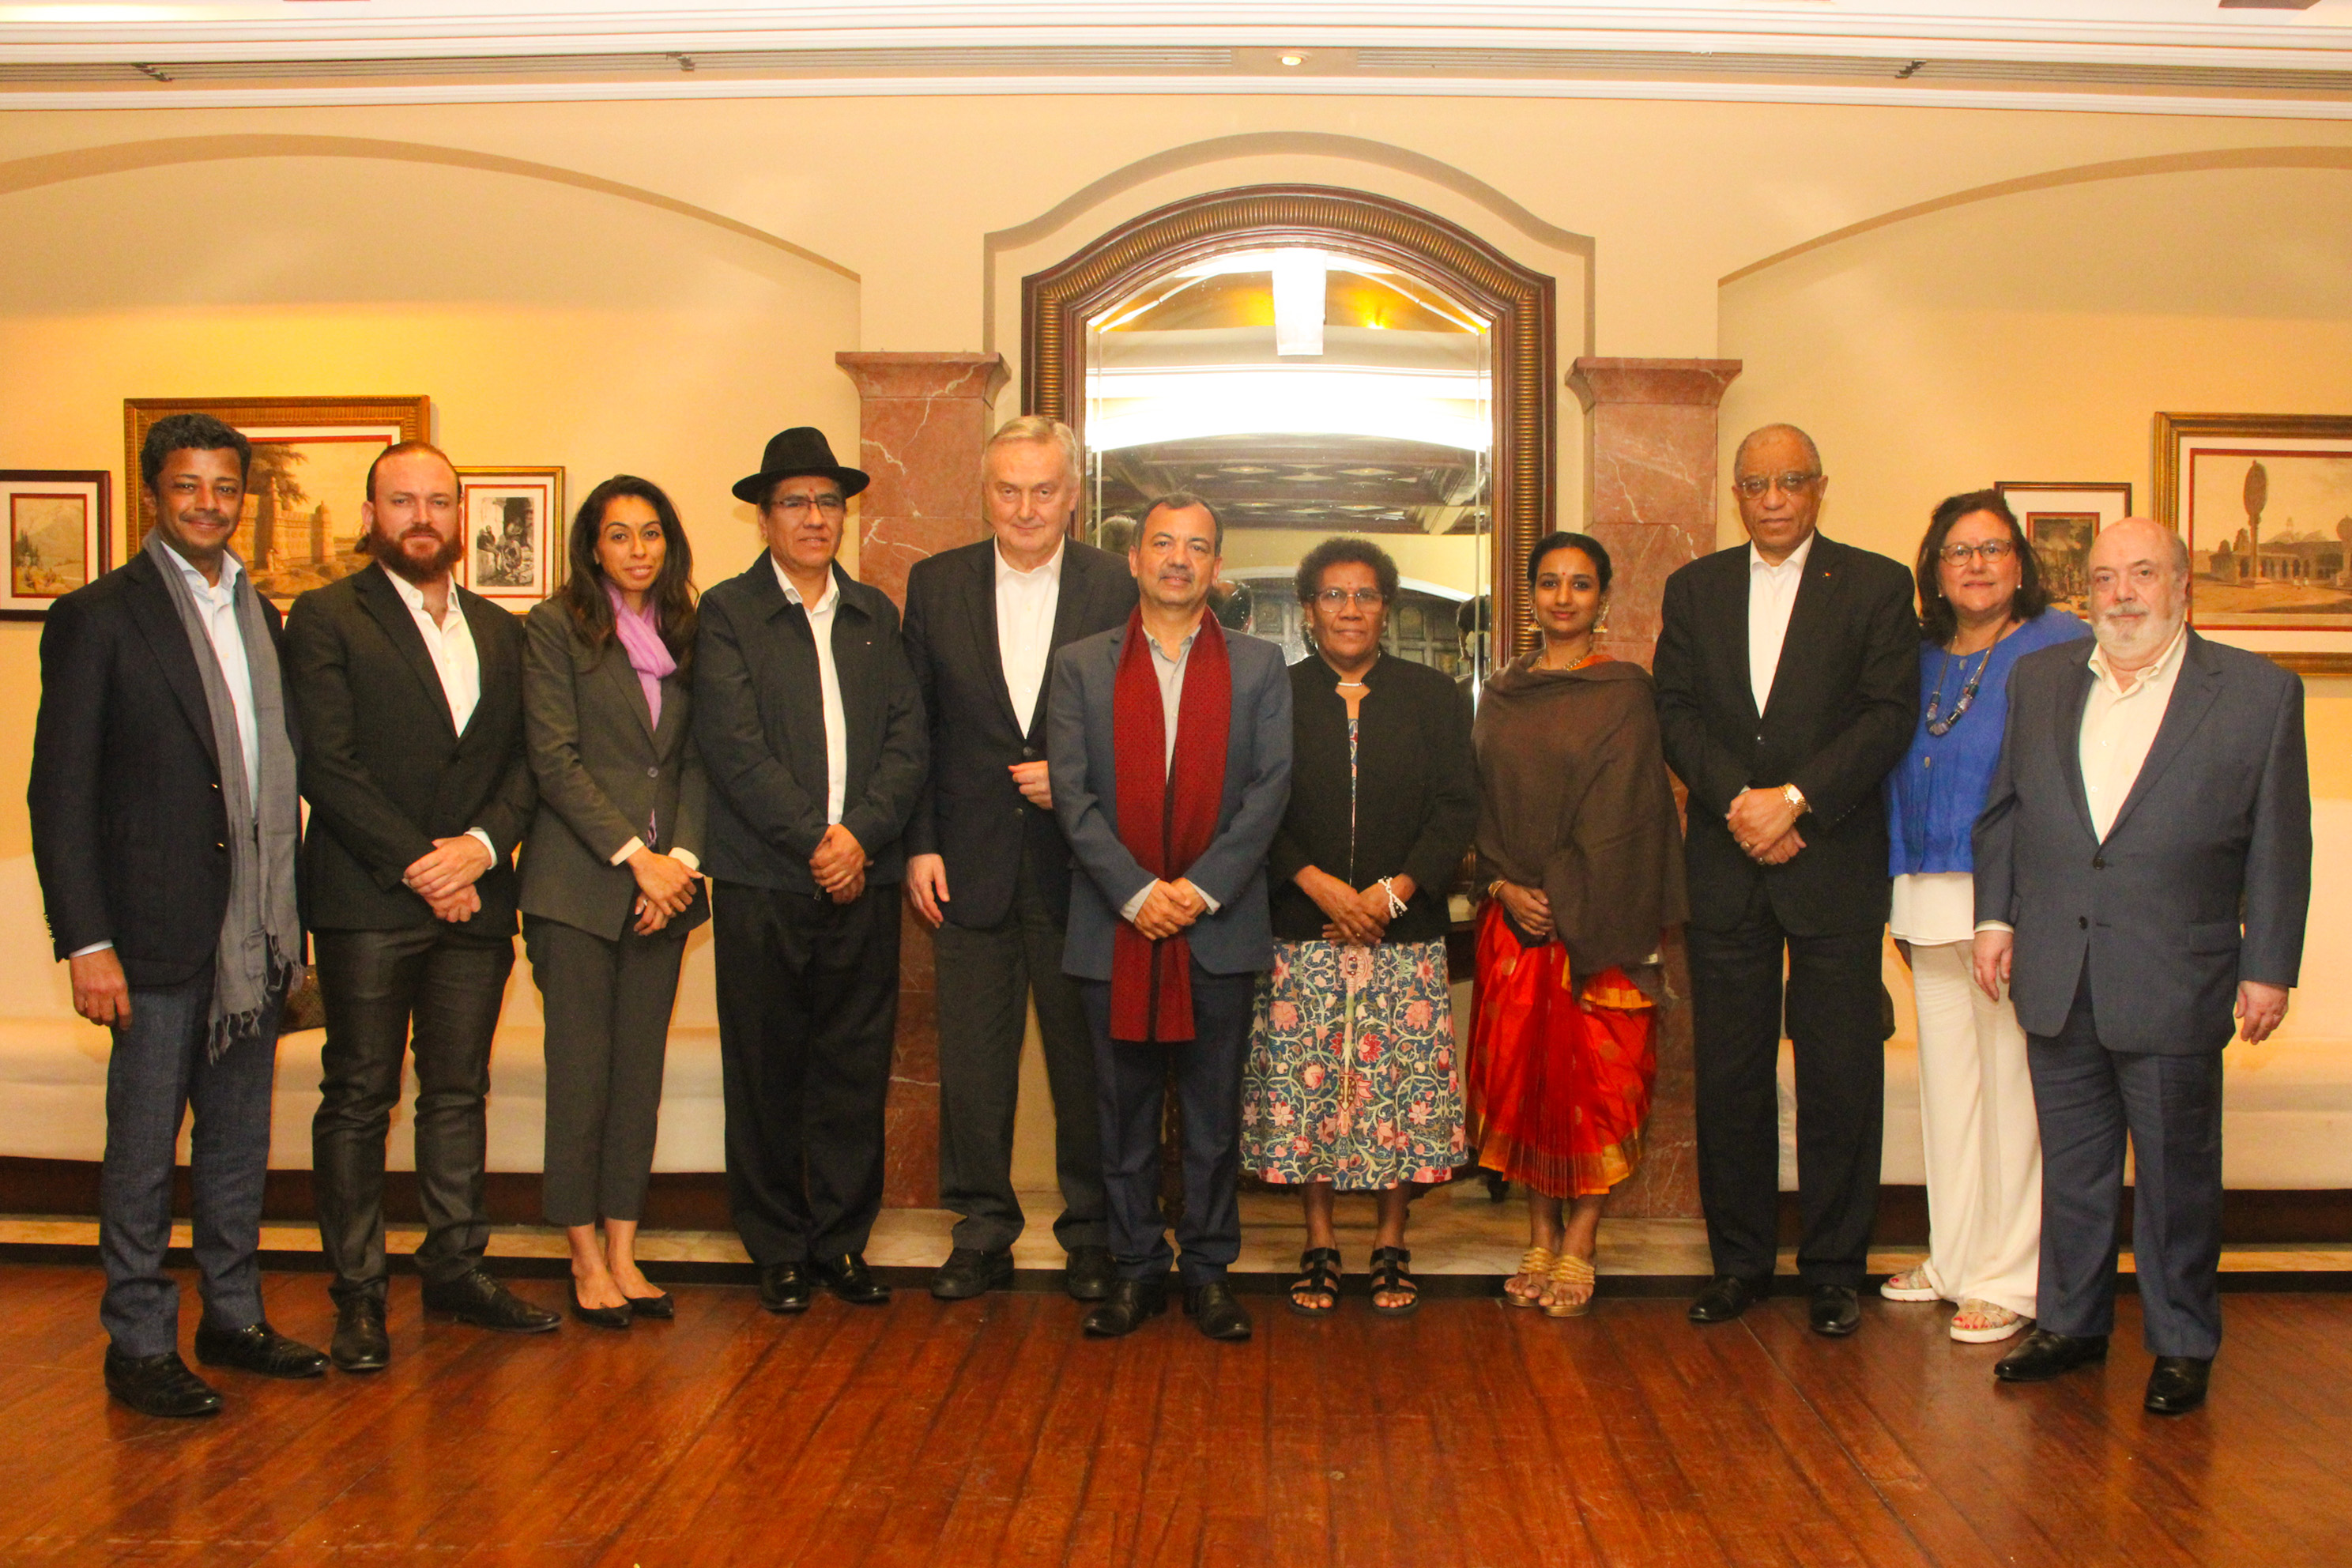 On 26 February 2024, DG, ICCR Shri Kumar Tuhin had interaction with the Permanent Representatives to the UN in New York from Angola,Bahrain,Bolivia,Bosnia & Herzegovina, Palau, Panama, Solomon Islands and Uruguay over dinner, briefing them on ICCR's work.